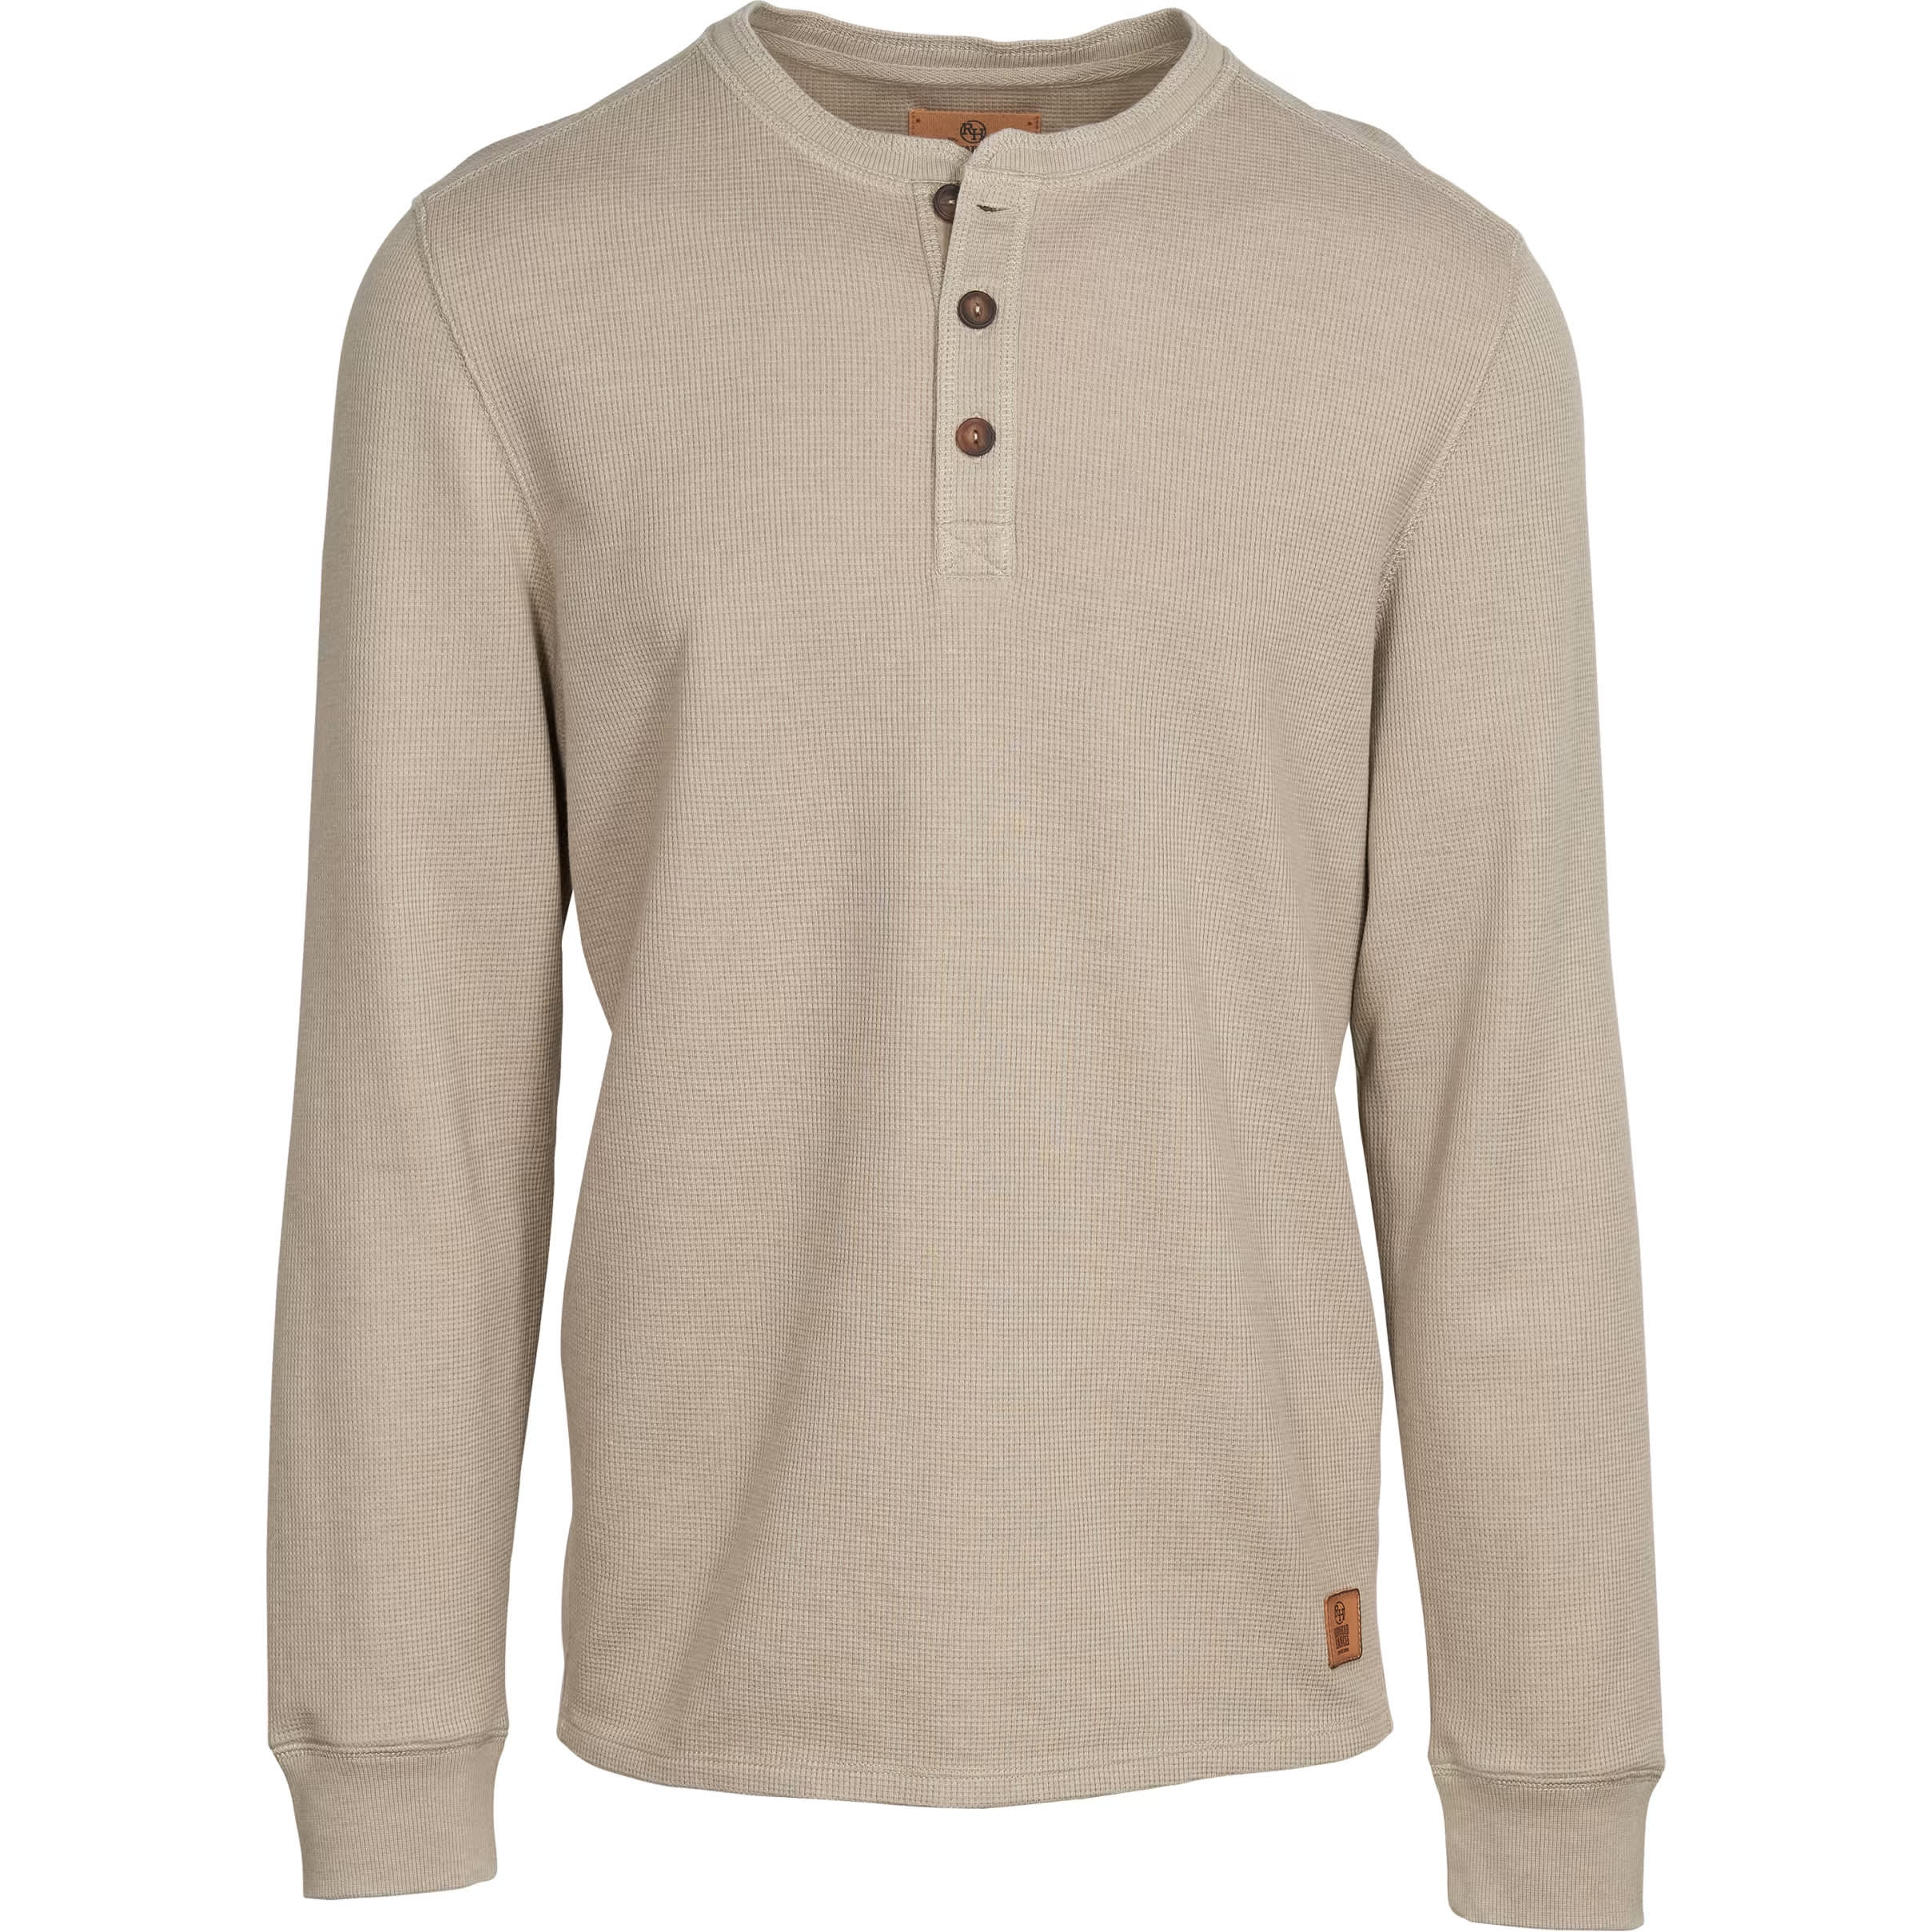 RedHead Men’s Ranch Grand Forks Waffle-Knit Long-Sleeve Henley 